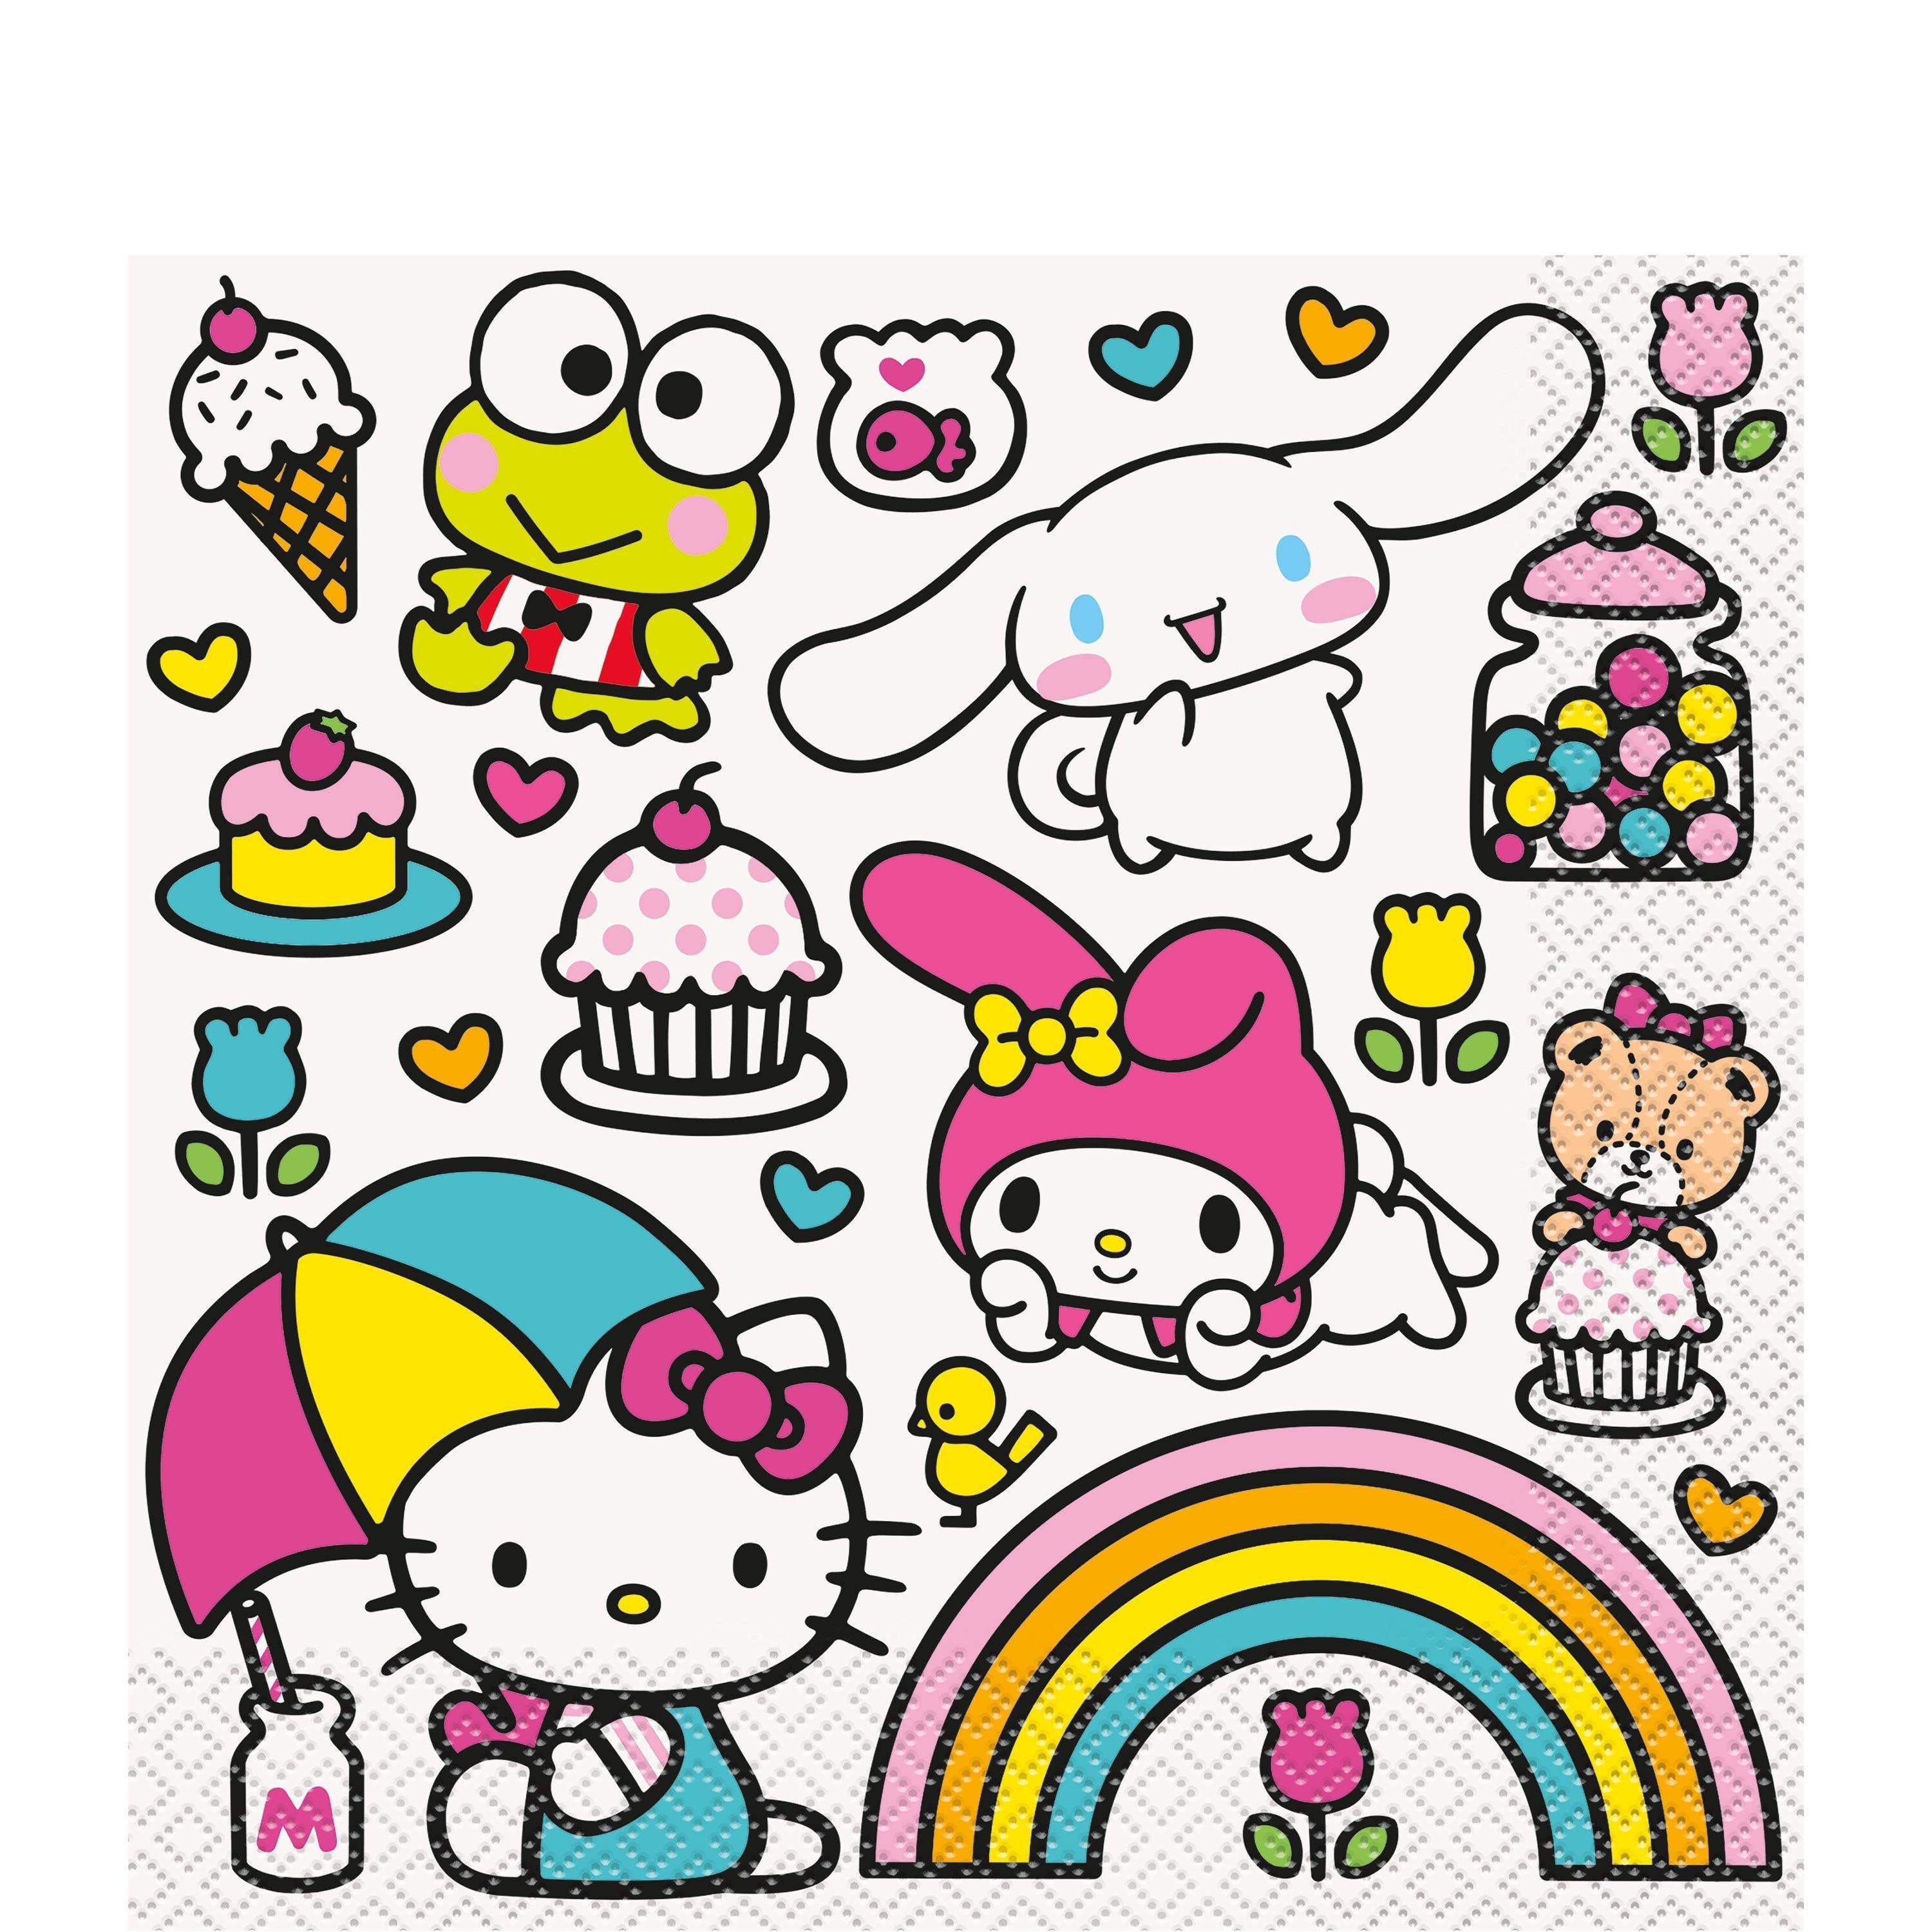 Hello Kitty and Friends Party Supplies Pack for 8 Guests - Kit Includes Plates, Napkins, Cups, Table Cover & Latex Balloons